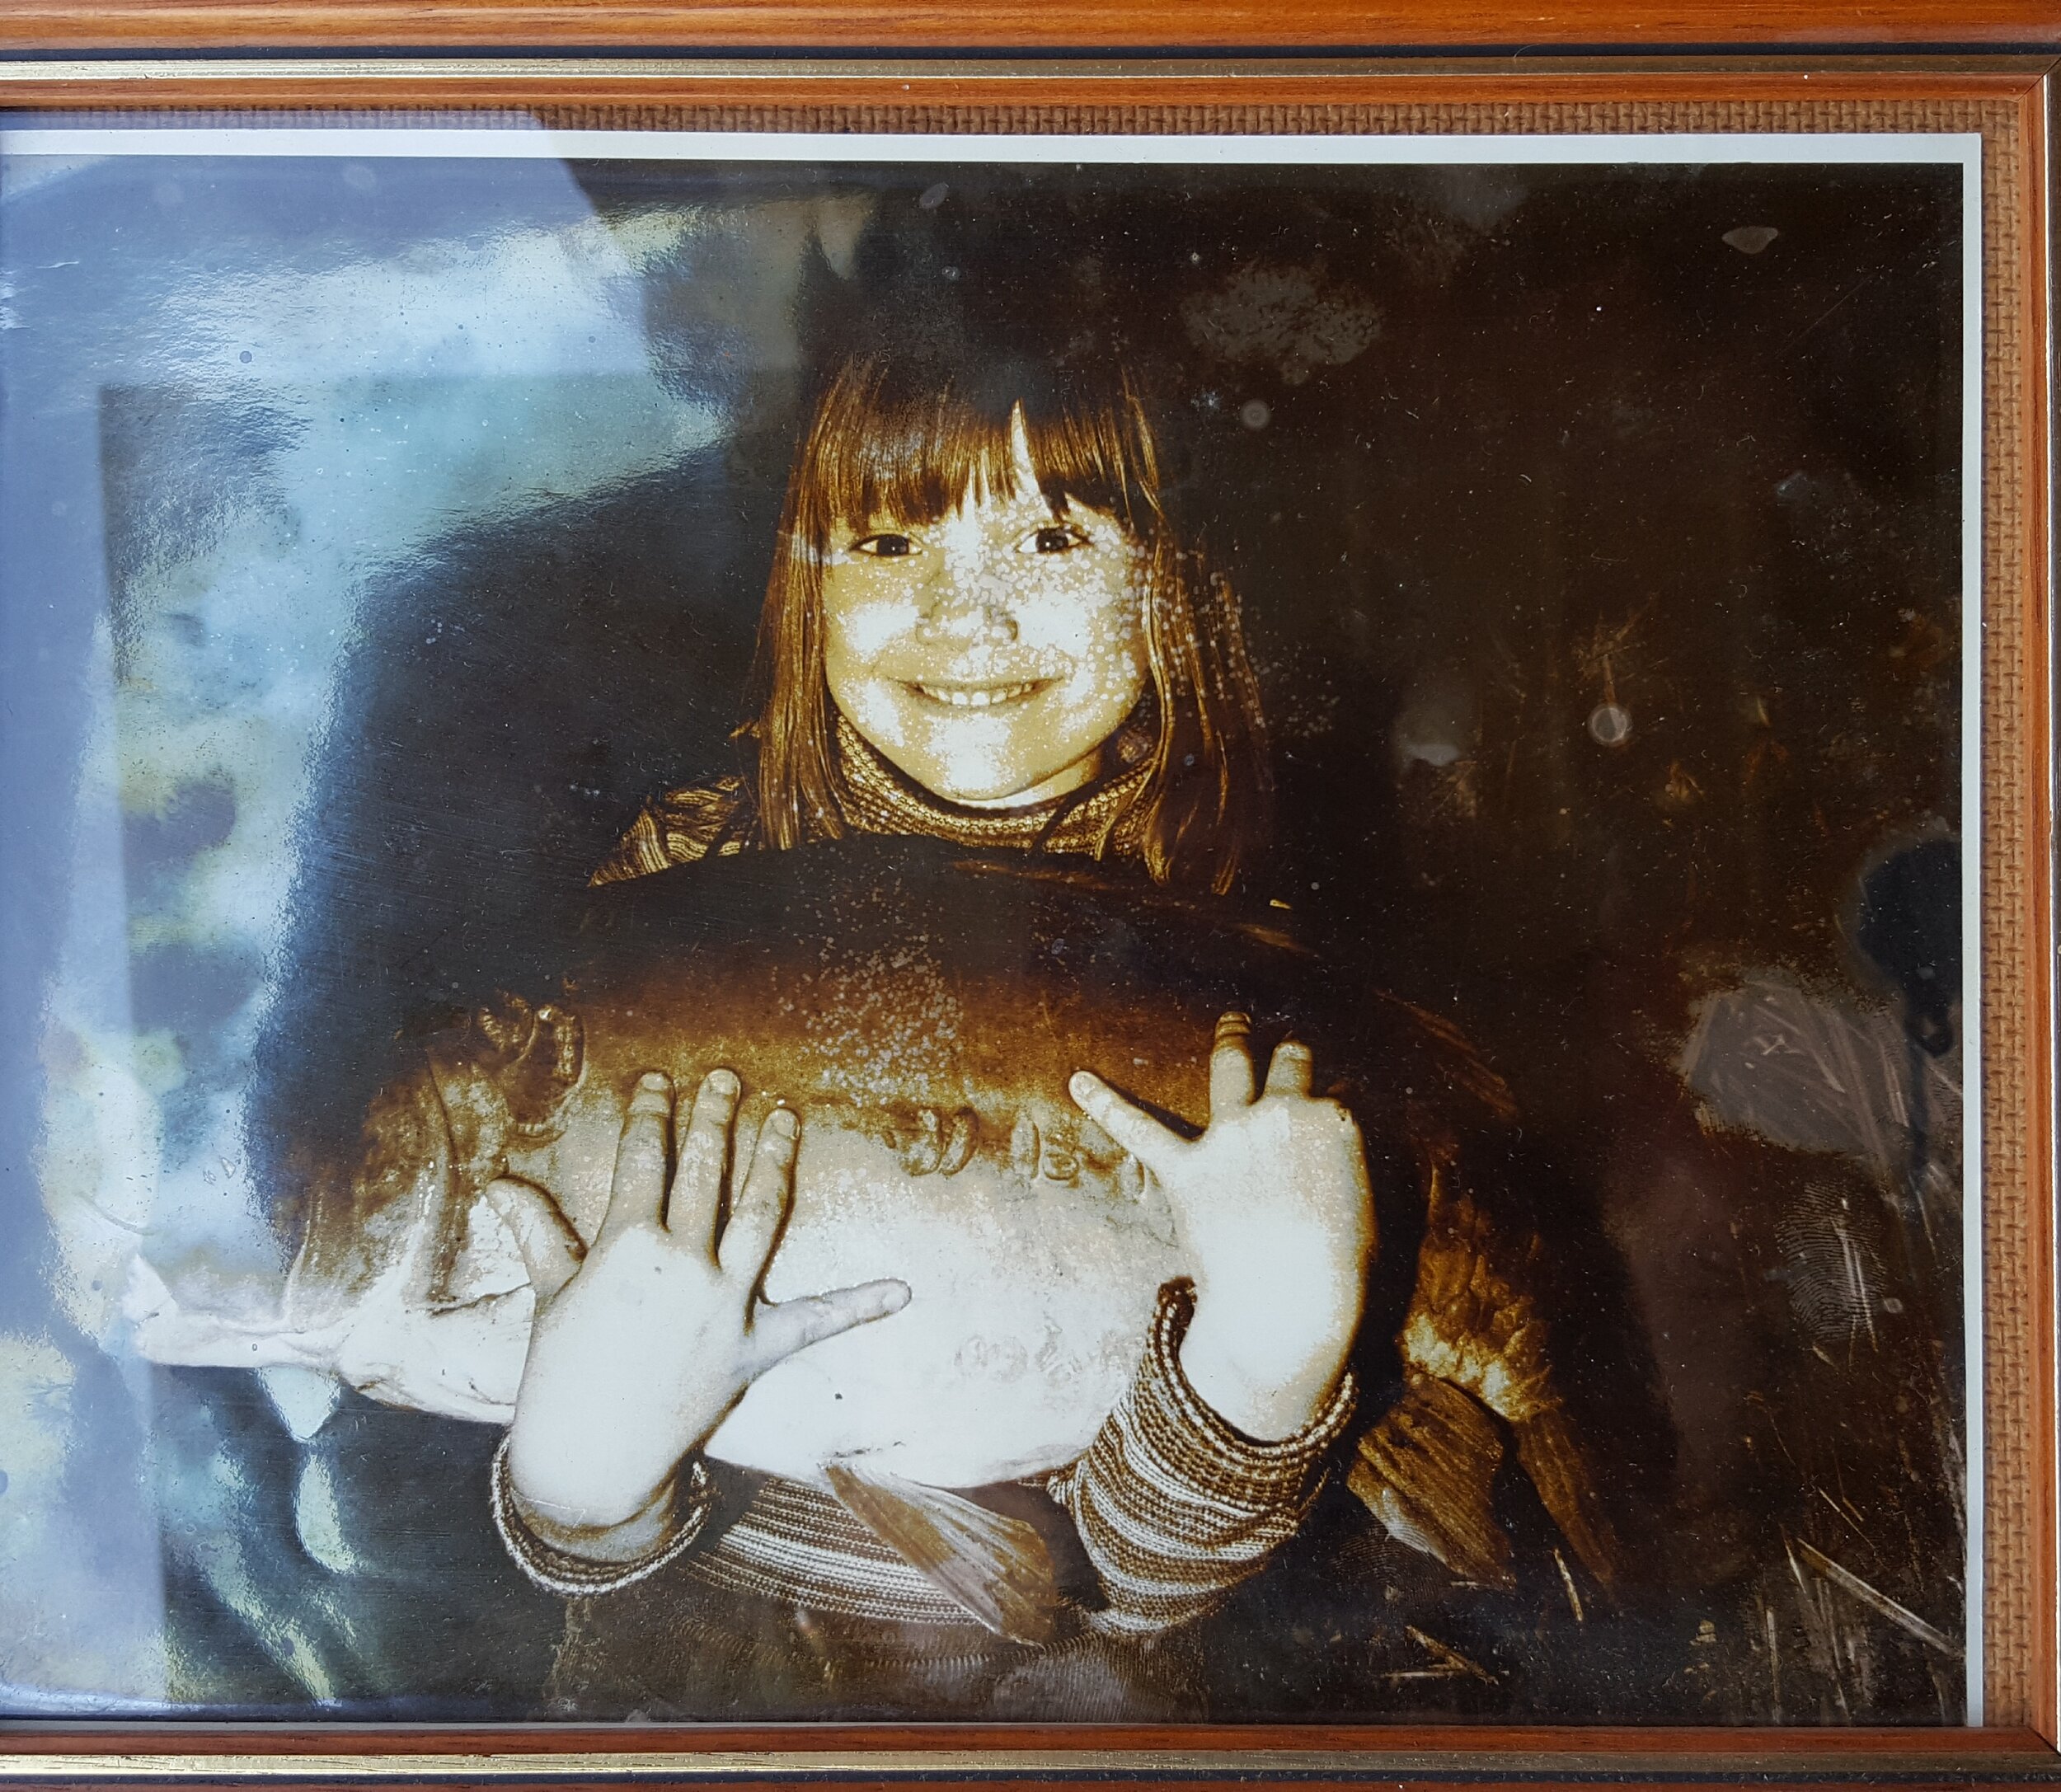 Lisa holding a mirror carp when she was a child.jpg